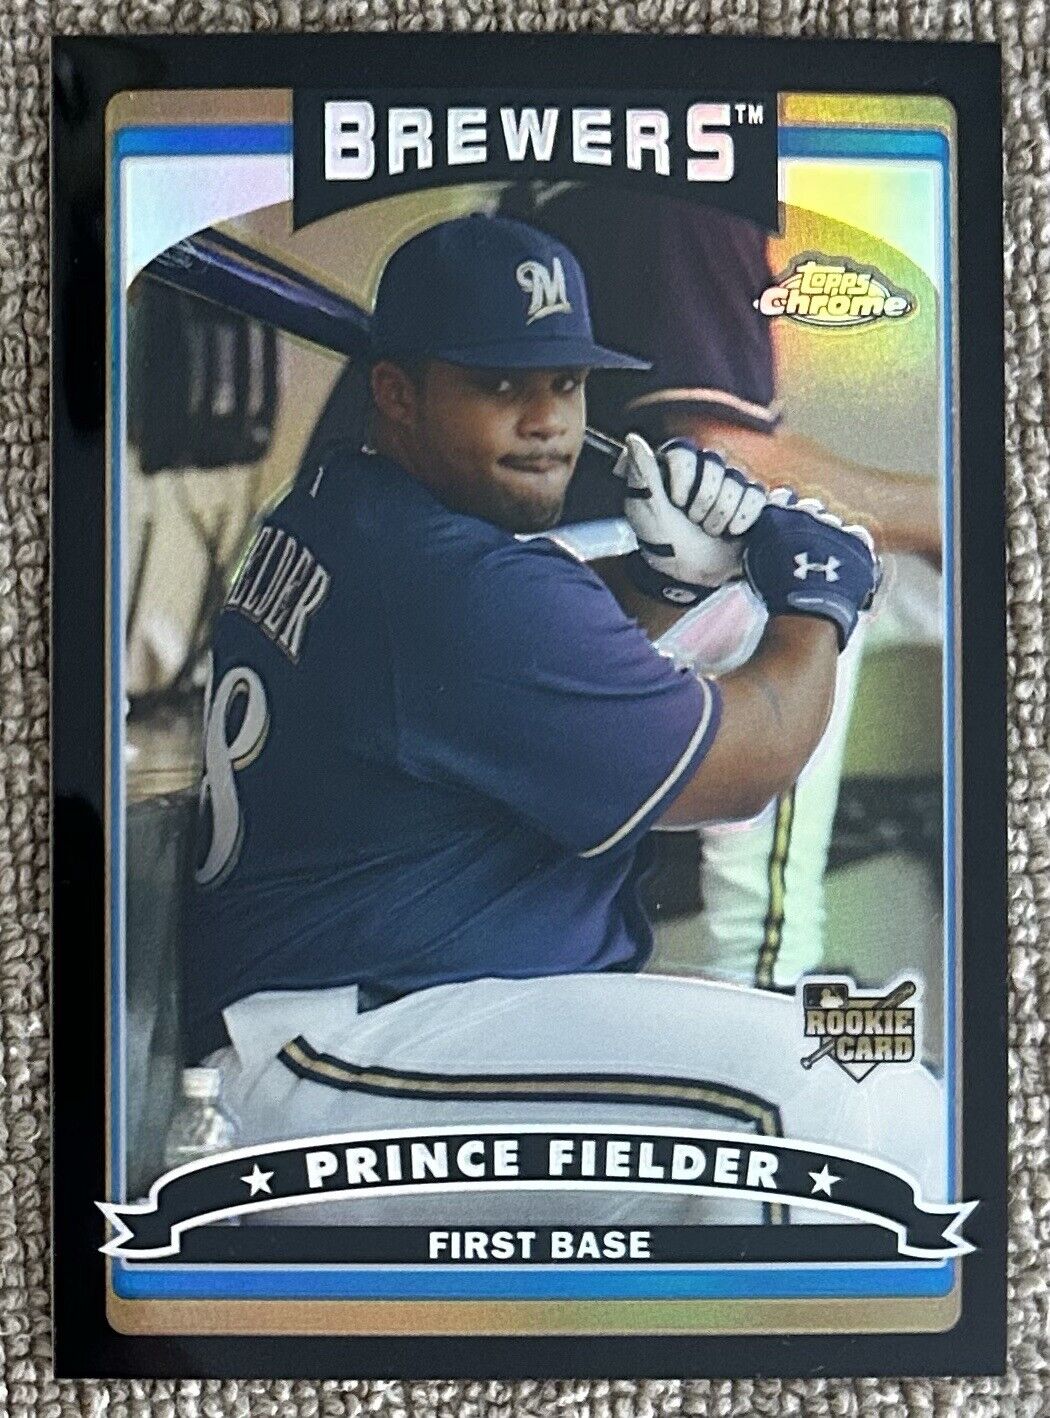 2006 Topps Chrome Black Refractor Prince Fielder Rookie /549 Brewers #307